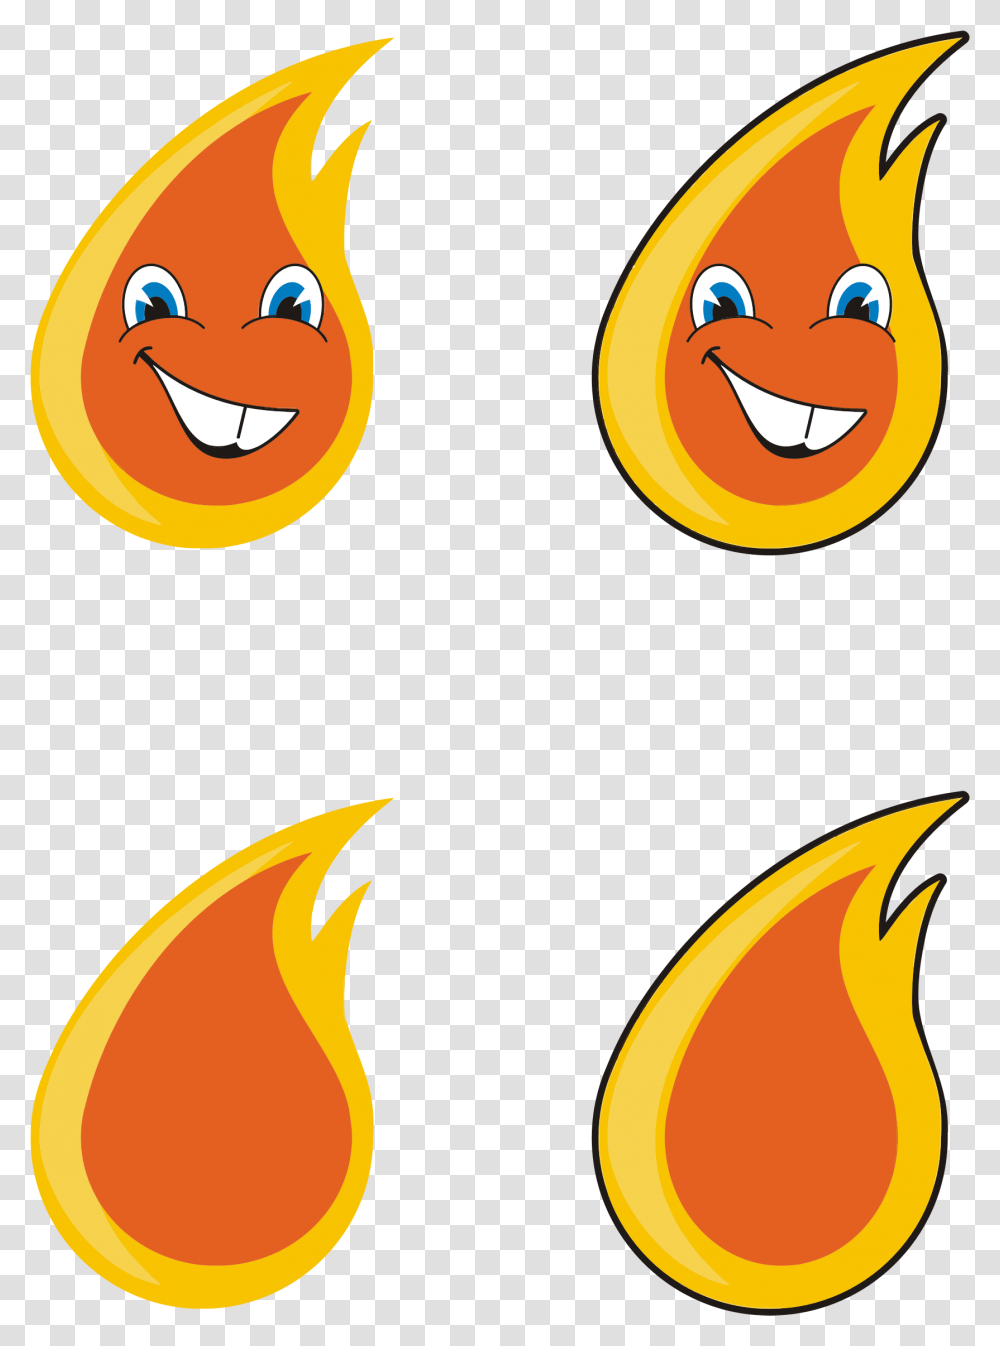 Anthropomorphic Flame Clip Arts Cartoon Flame, Fire, Angry Birds Transparent Png